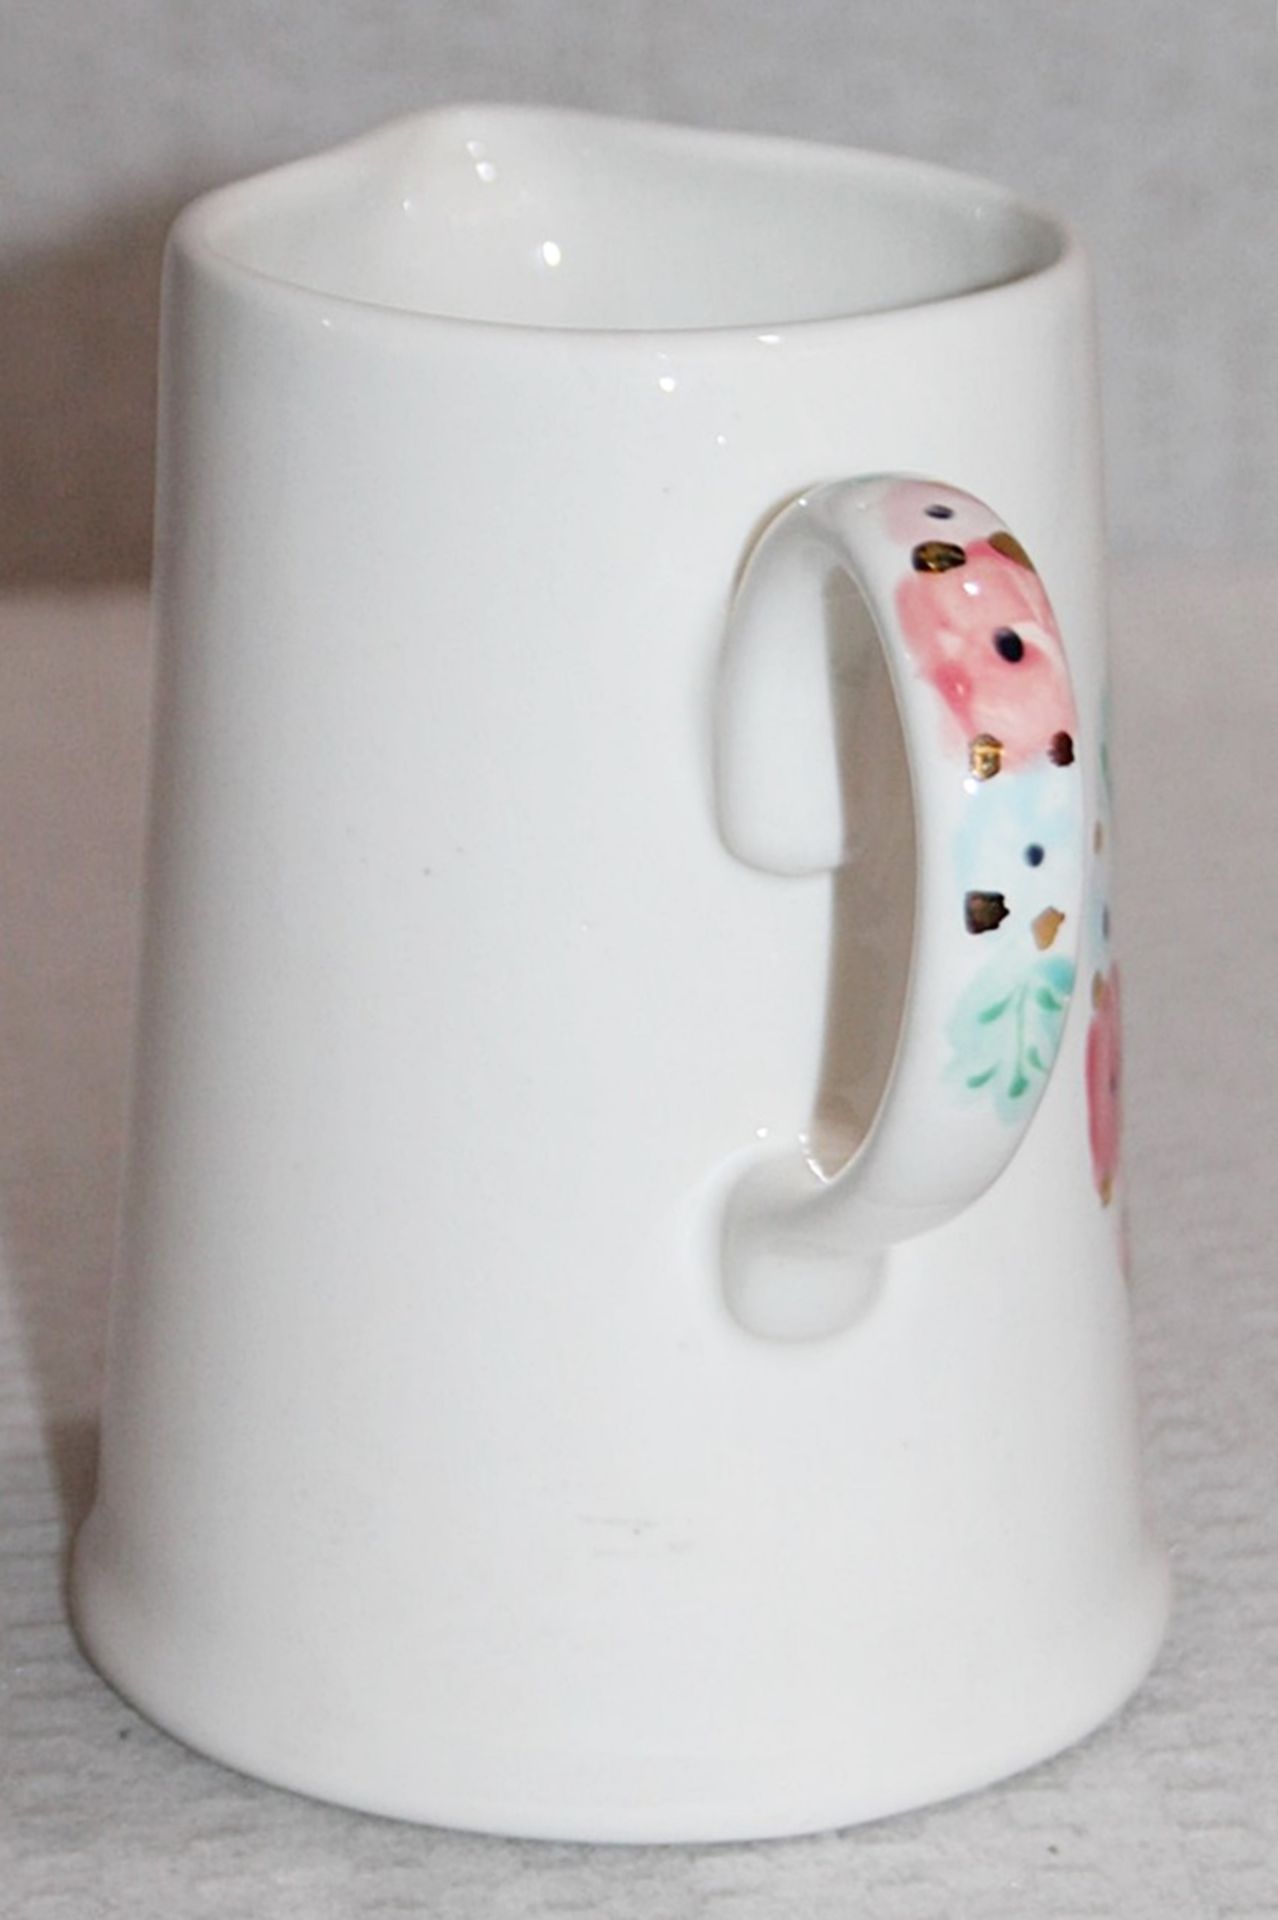 1 x Ceramic Handpainted Jug With Gilded Edging - Ex-Display Item From A London Department Store - - Image 7 of 7